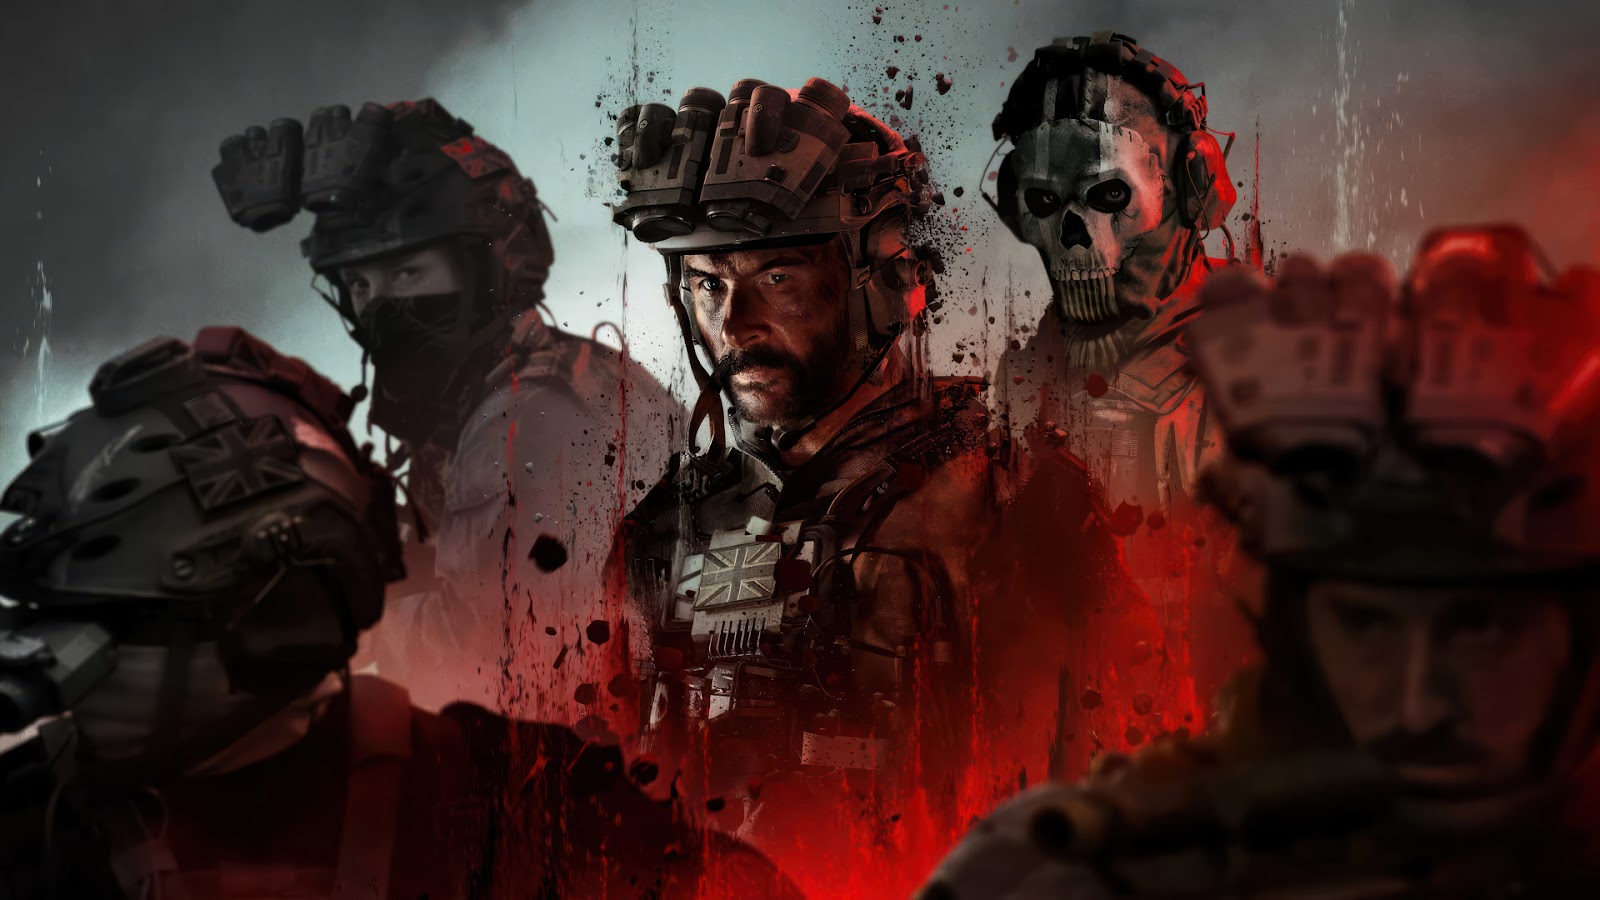 Modern Warfare 3: Modern Warfare 3 free on PS5, Xbox: Here is how to avail  - The Economic Times